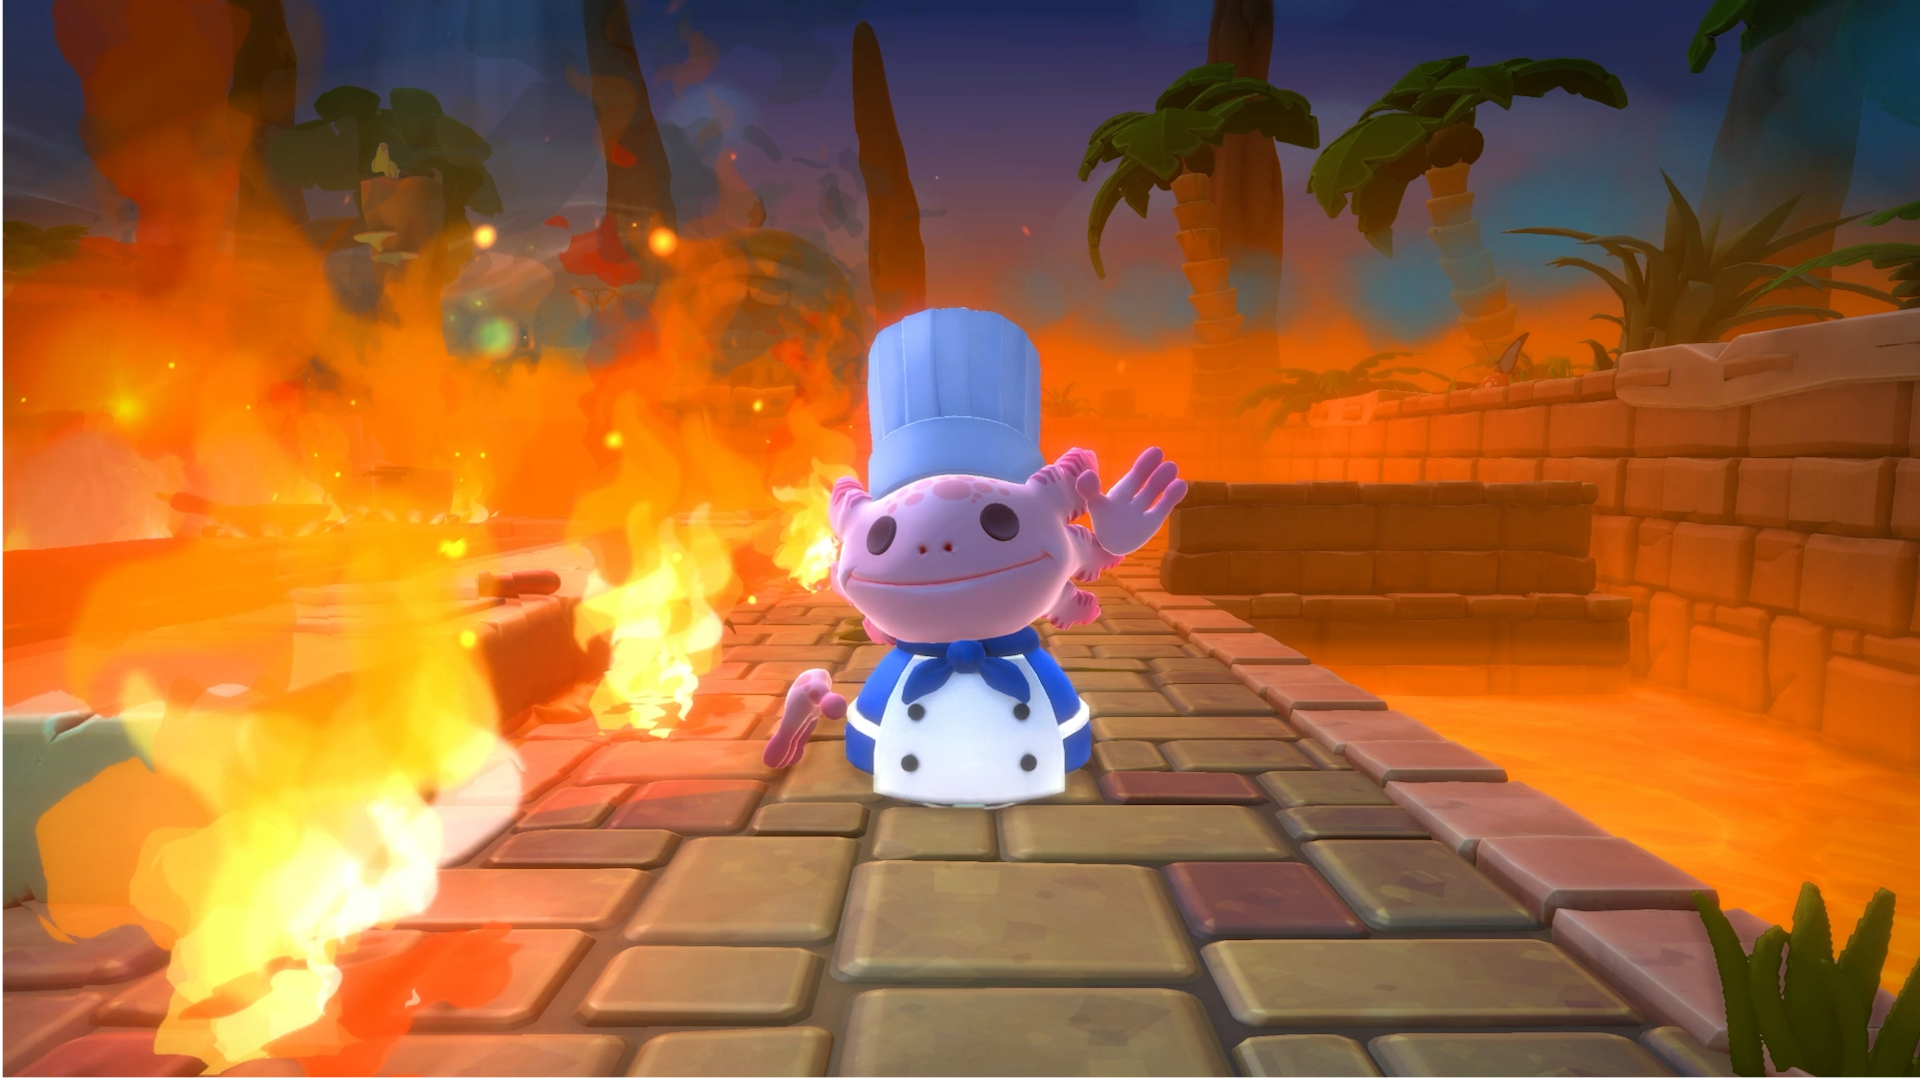 overcooked all you can eat nintendo switch